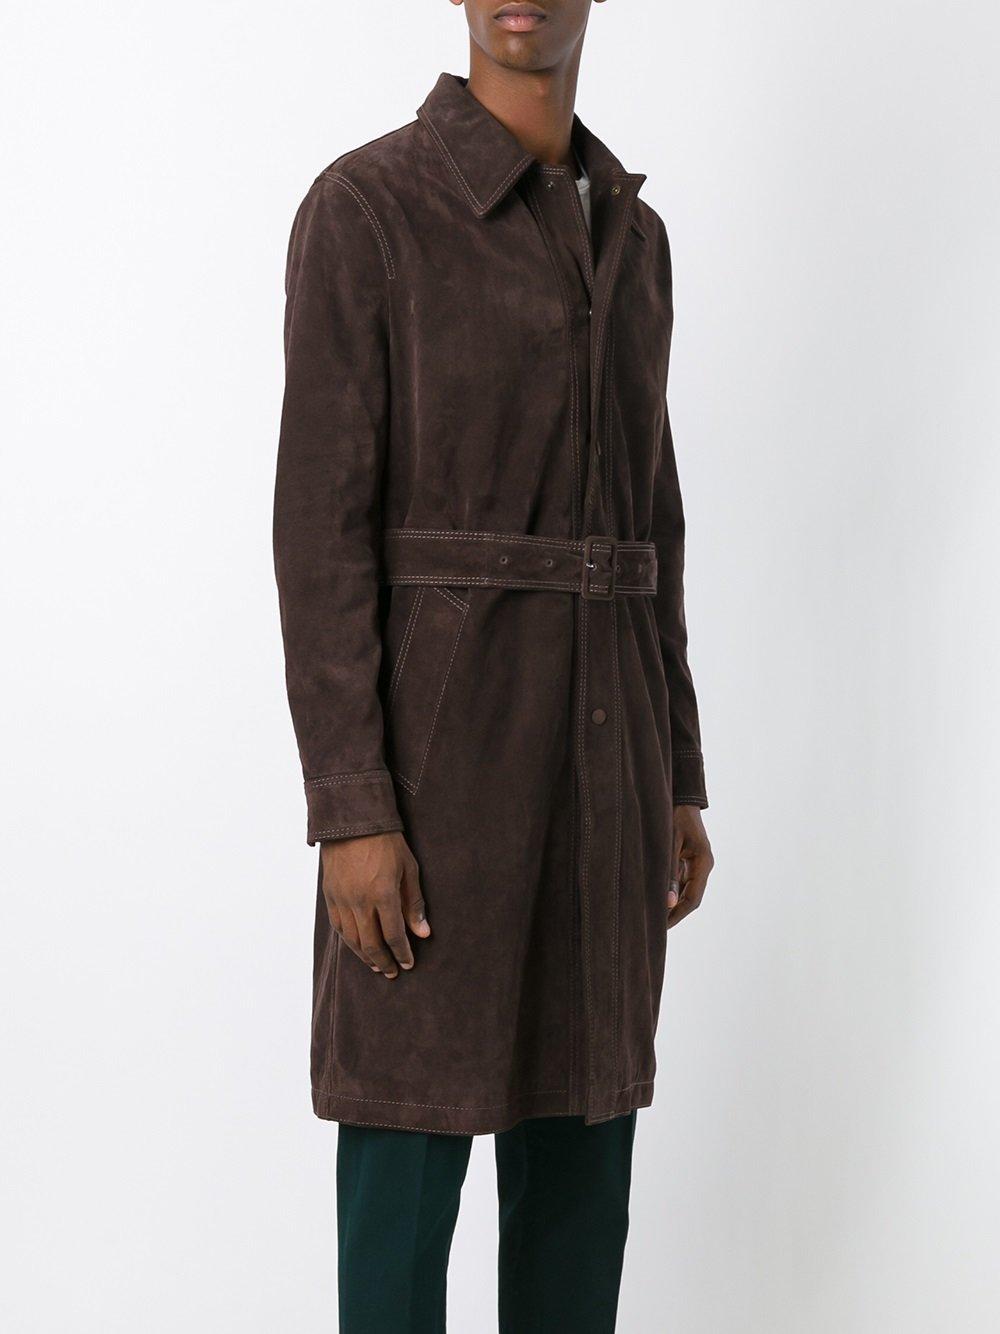 Ami Suede Trench Coat in Brown for Men | Lyst